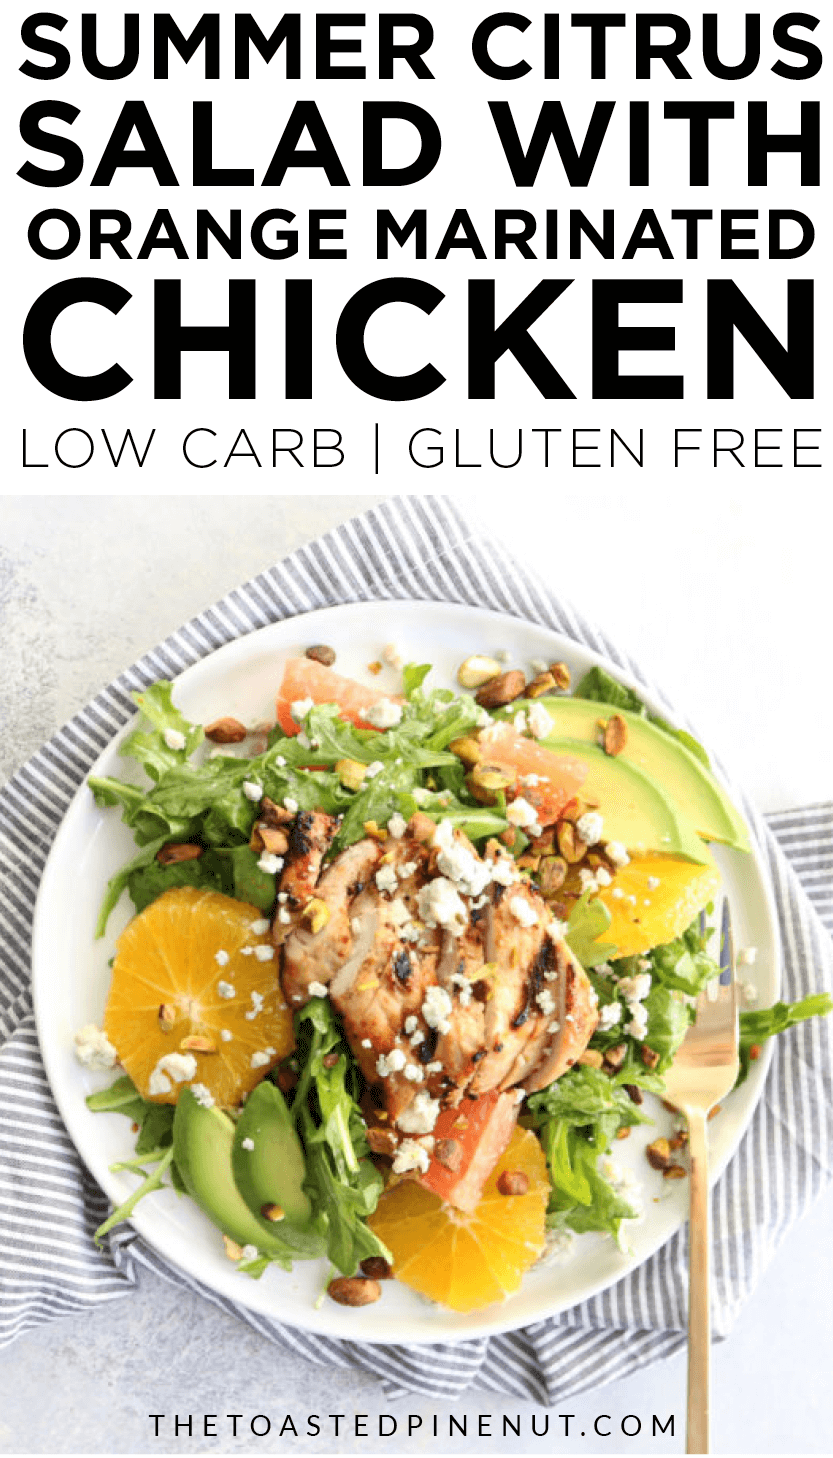 The best summer citrus salad that will get you ready for grilling season! The orange chicken is so sweet and tangy, you'll be wanting seconds. thetoastedpinenut.com #thetoaastedpinenut #summer #salad #citrus #orangechicken #lowcarb #glutenfree #easydinner #weeknightmeal